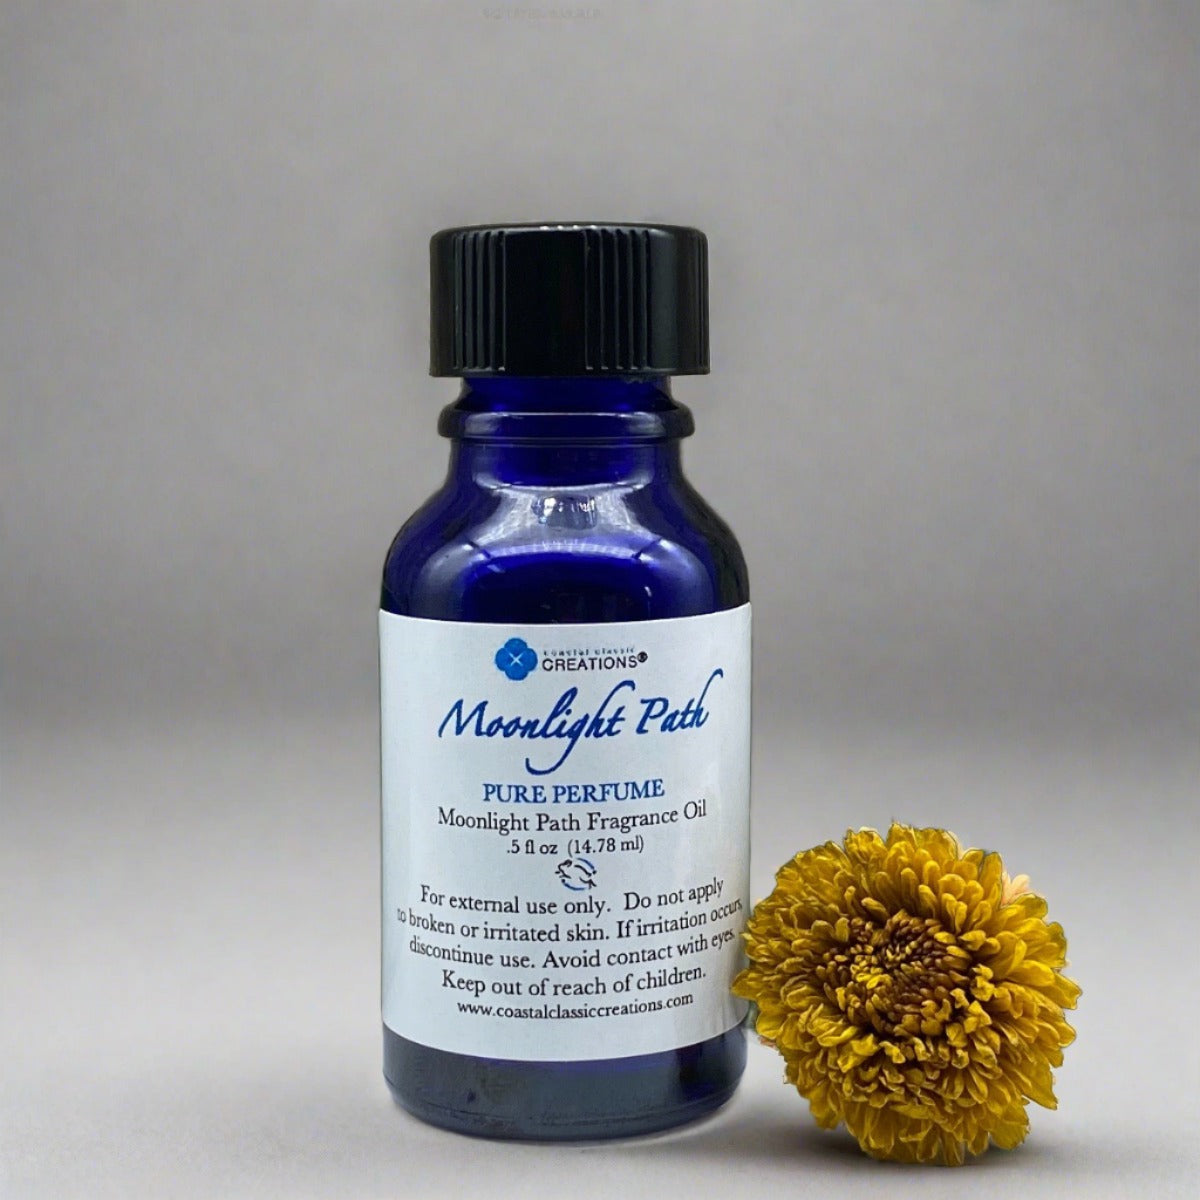 A blend of lavender and violet, Moonlight Path Perfume 